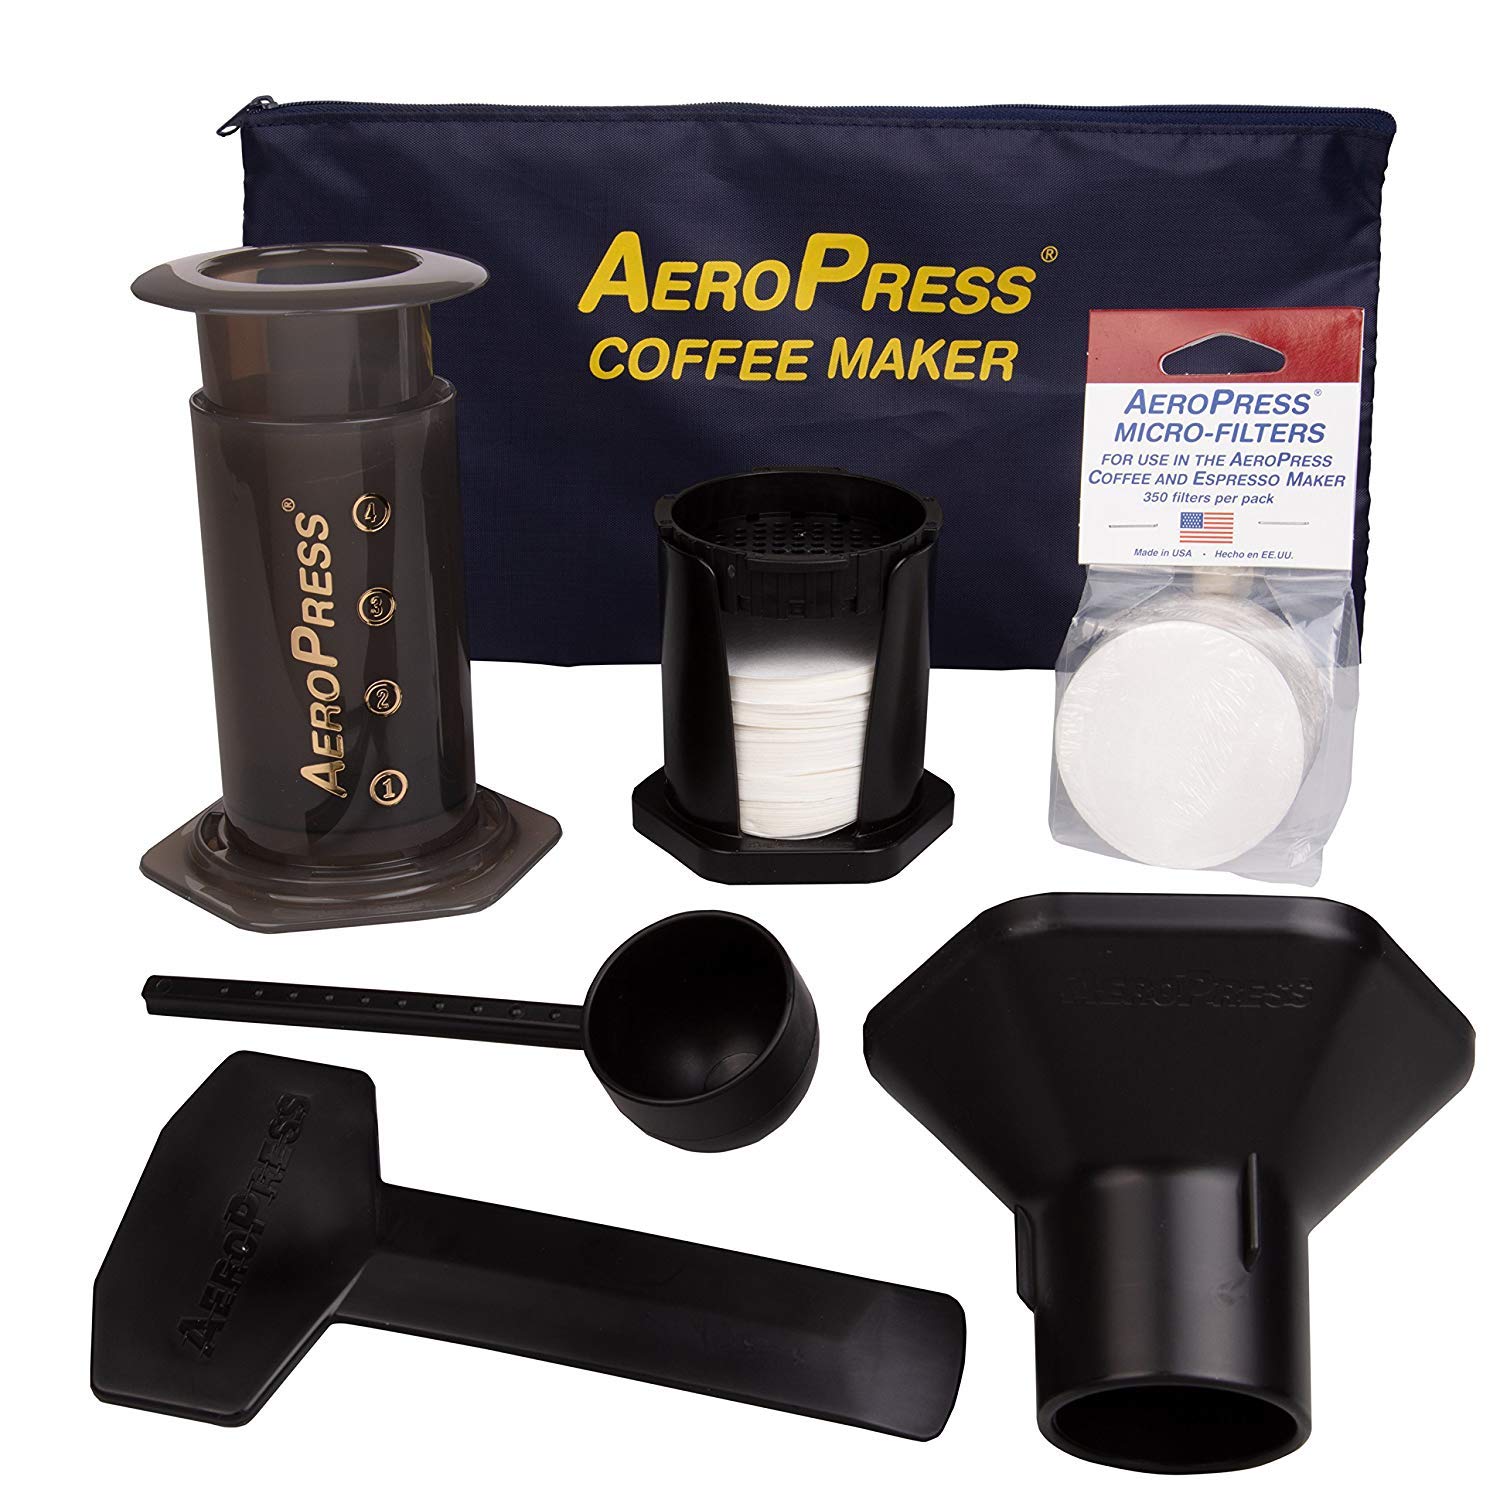  AeroPress Coffee and Espresso Maker with Tote Bag and 350 Additional Filters - Quickly Makes Delicious Coffee without Bitterness - 1 to 3 Cups Per Press